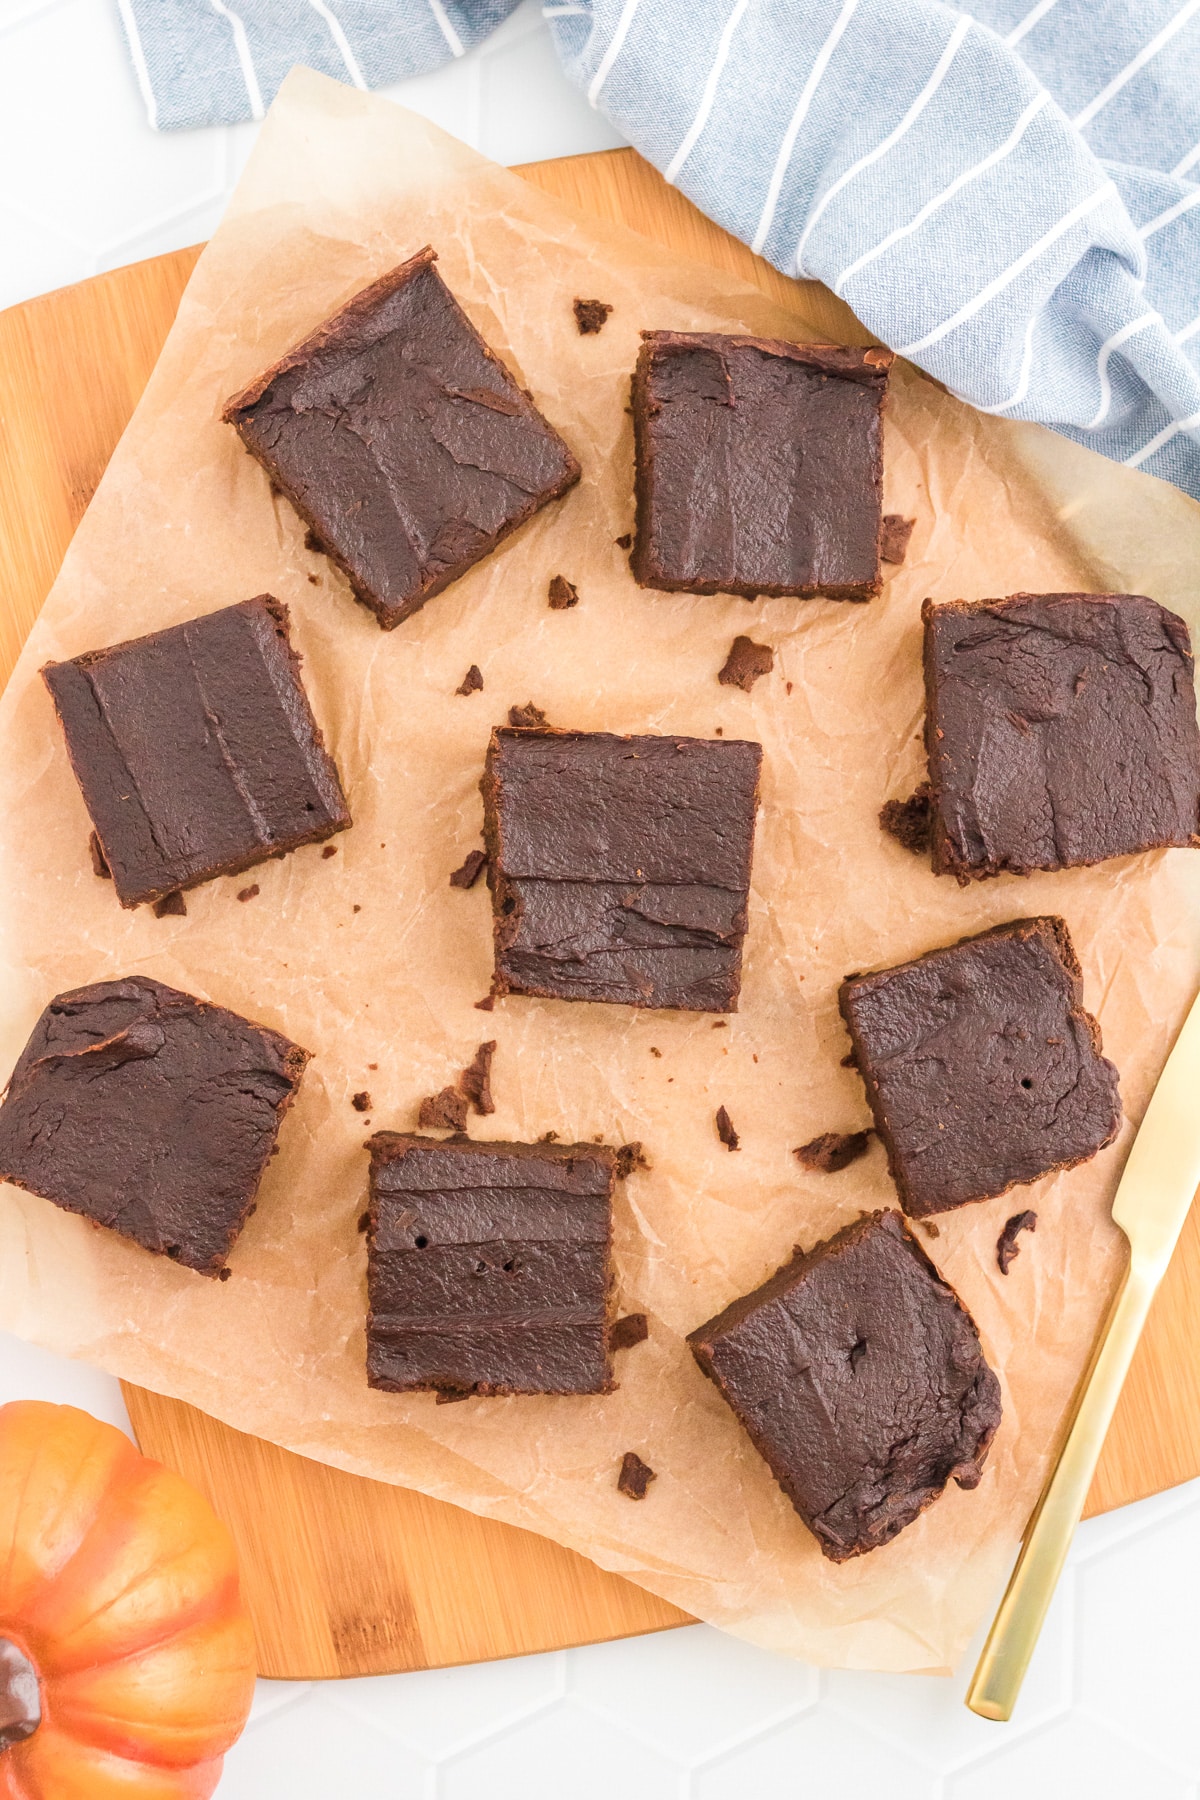 Chocolate pumpkin brownies on a cutting board sliced into squares.